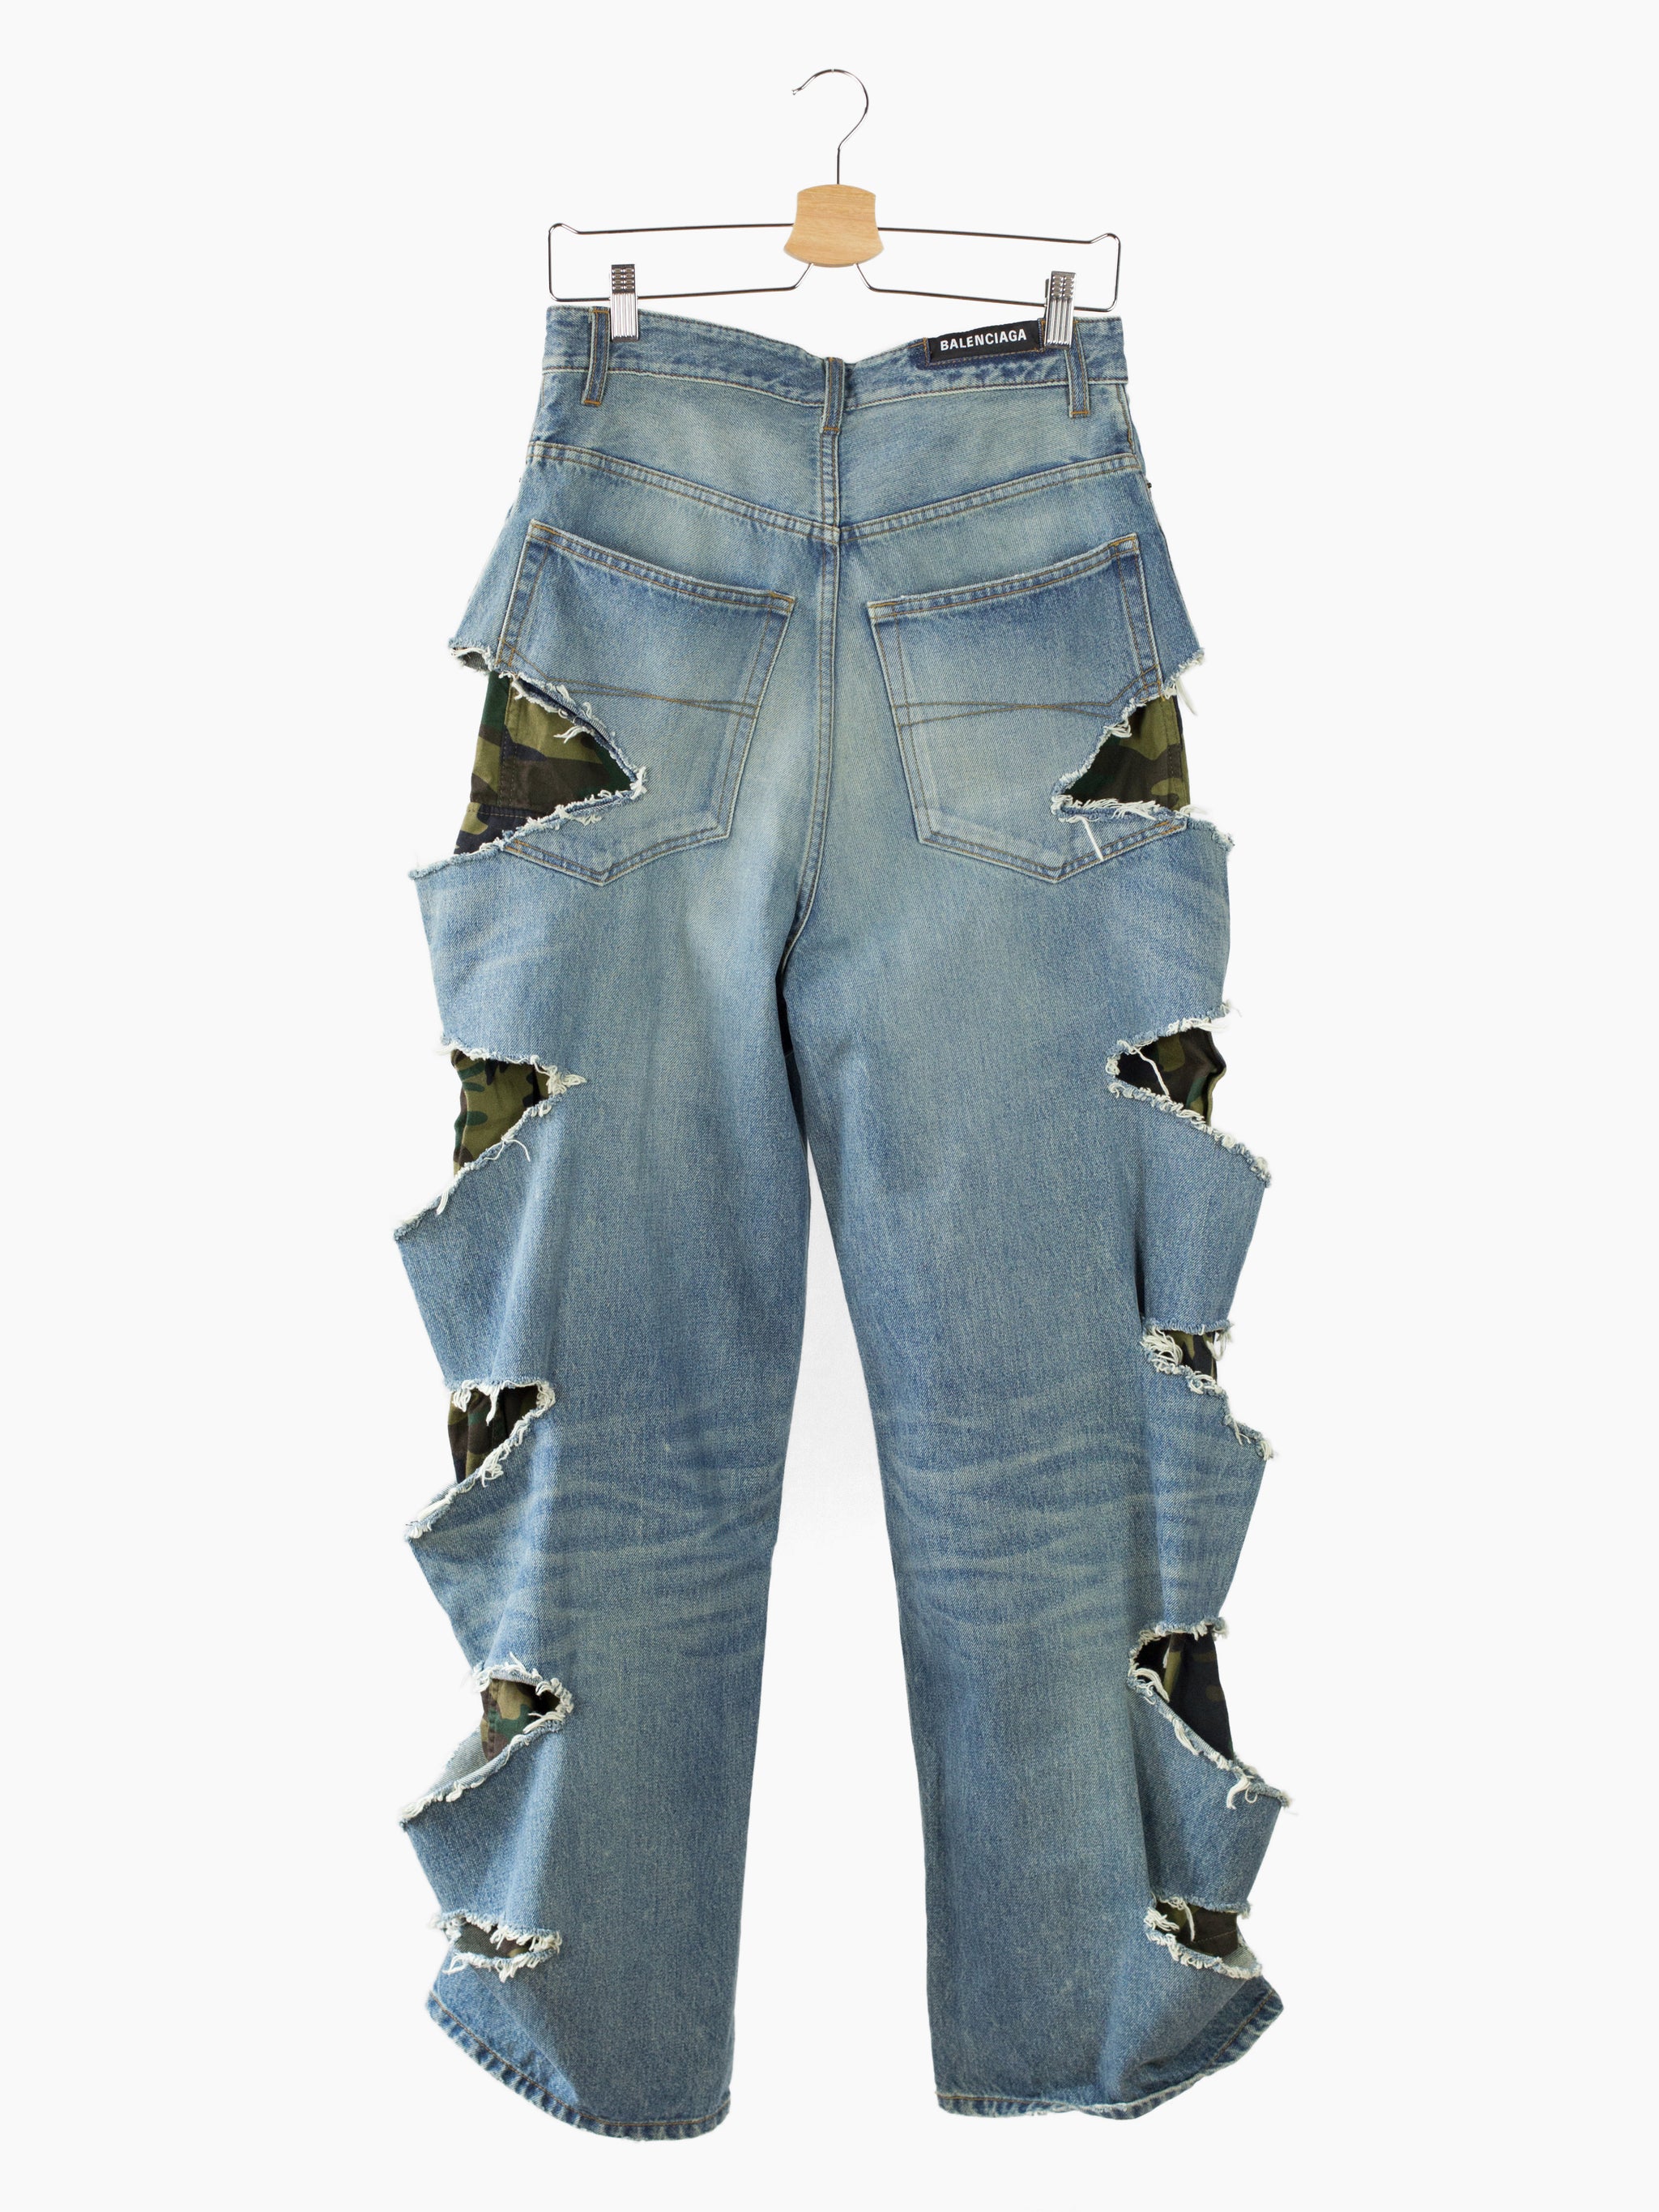 Balenciaga Patched Pockets Baggy Jeans